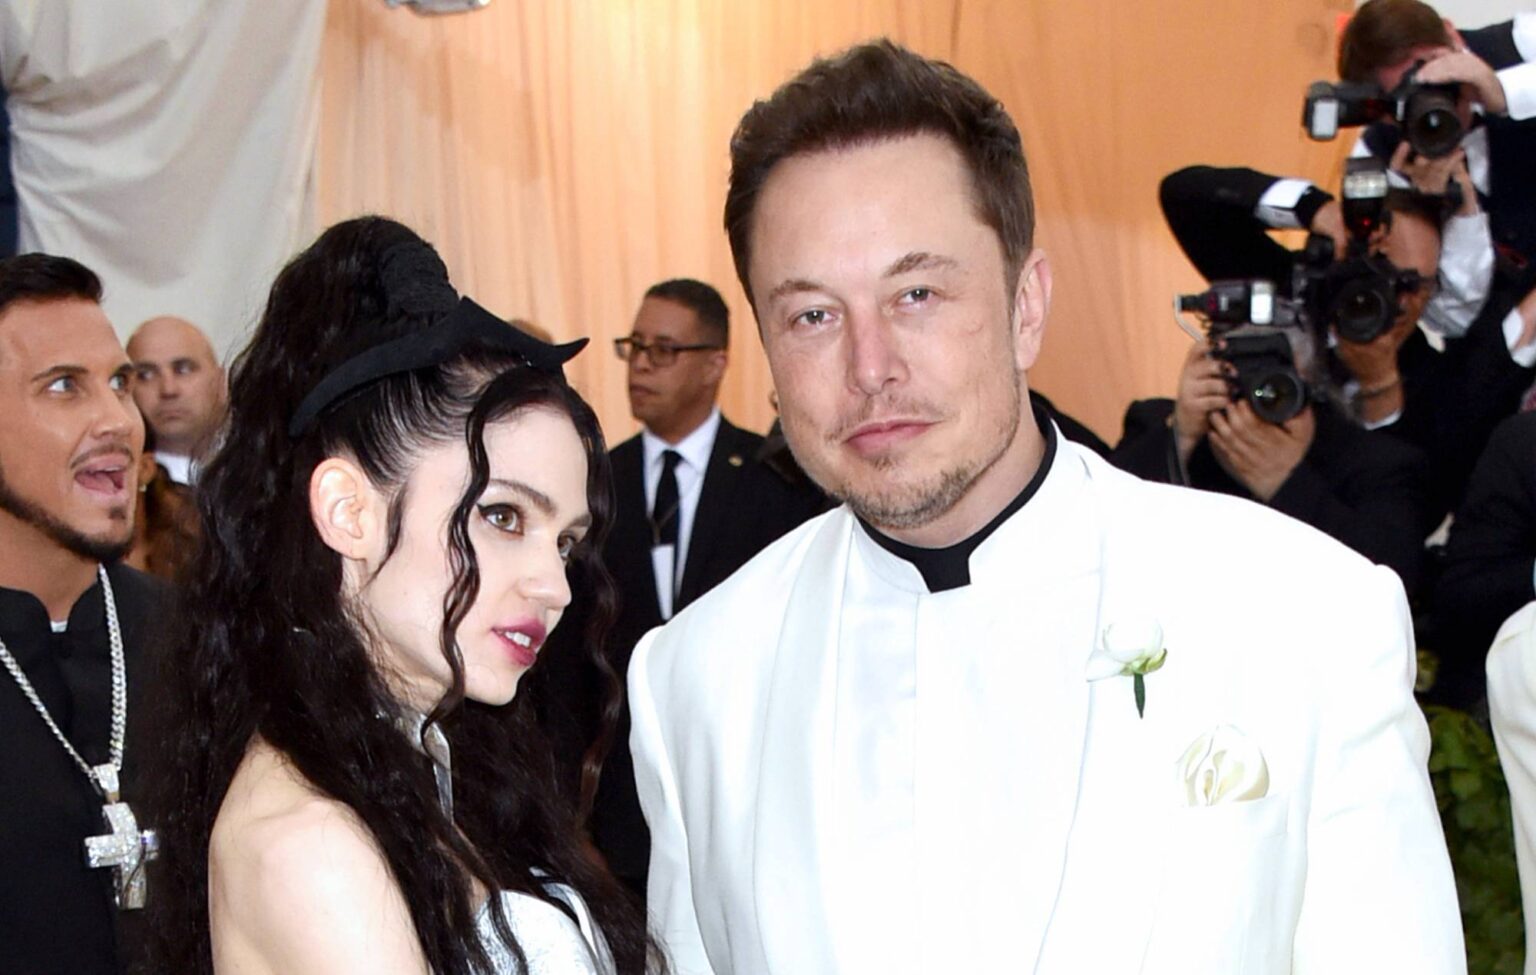 The baffling couple is back again, this time with a new daughter and thus a new and incoherent name. Find out the name of Elon Musk and Grime's baby.